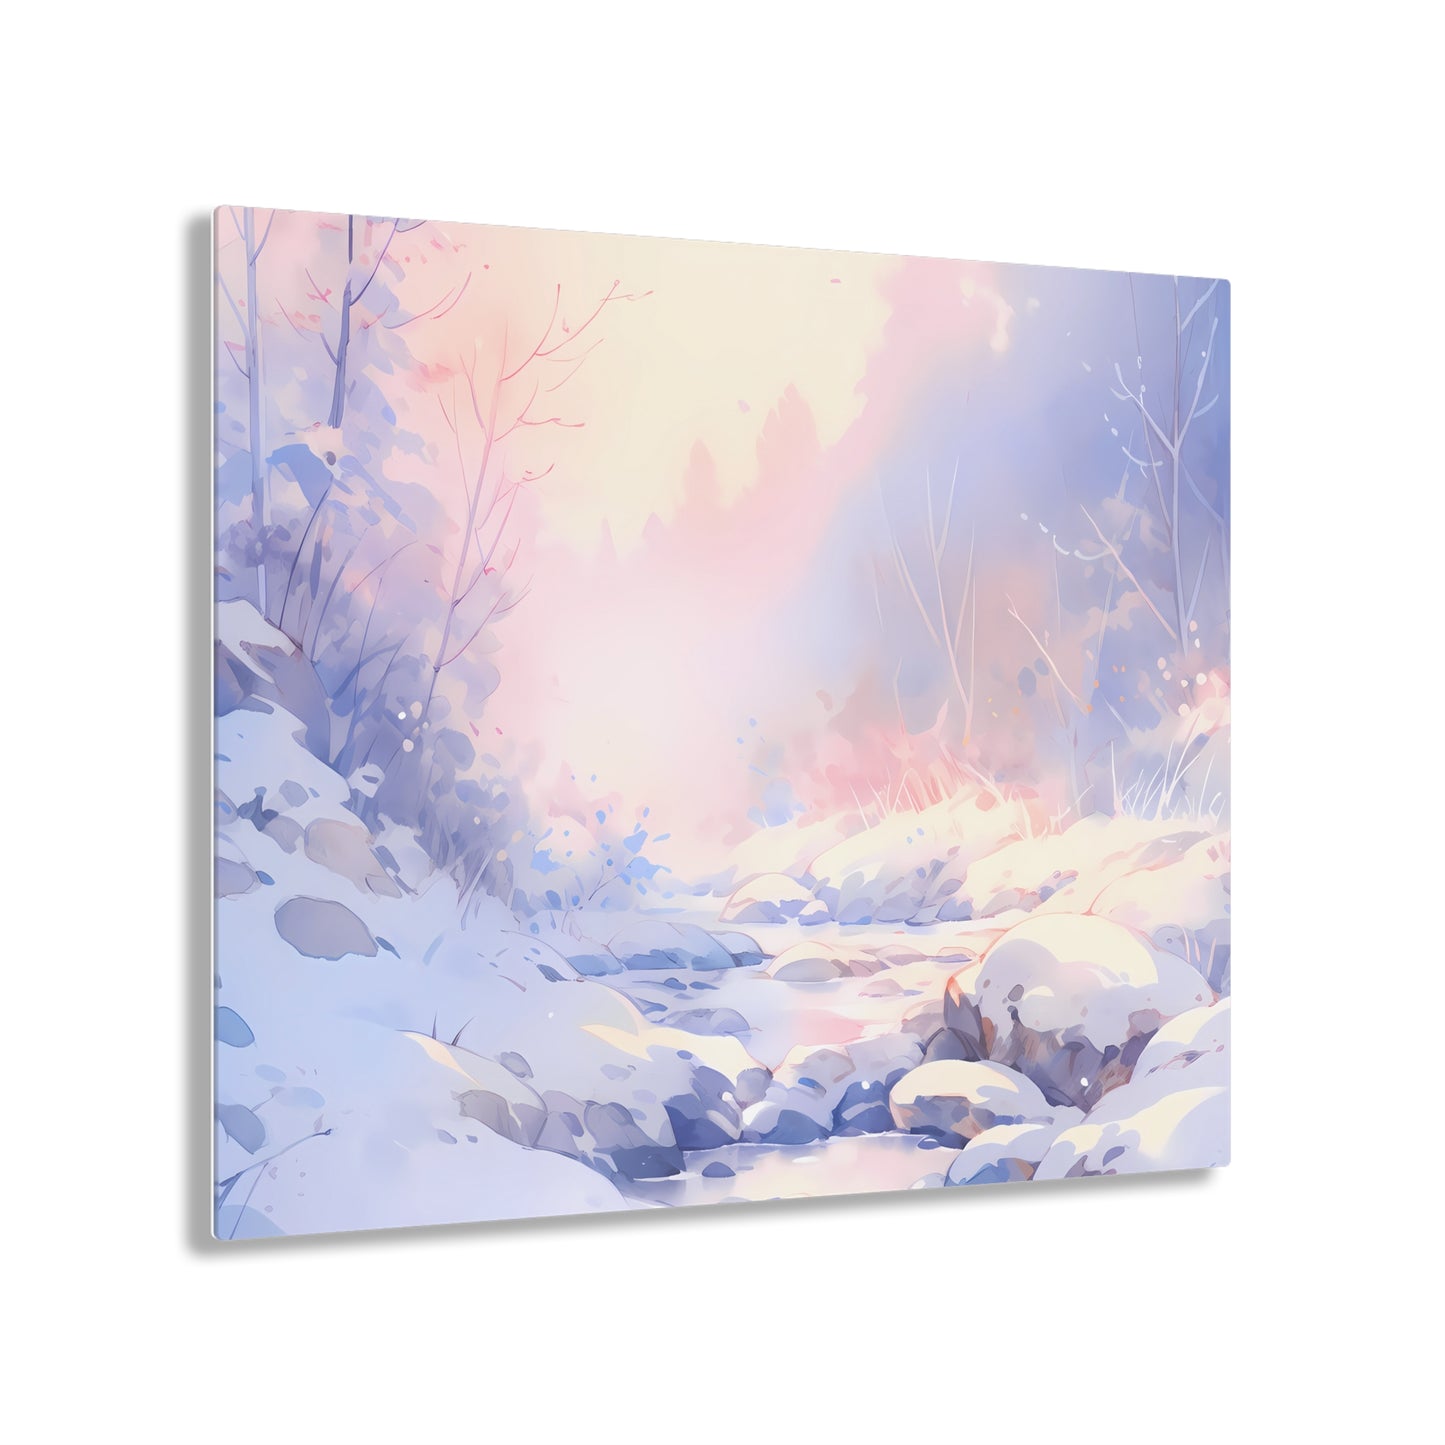 Silent Snowscape - Anime Glass Painting